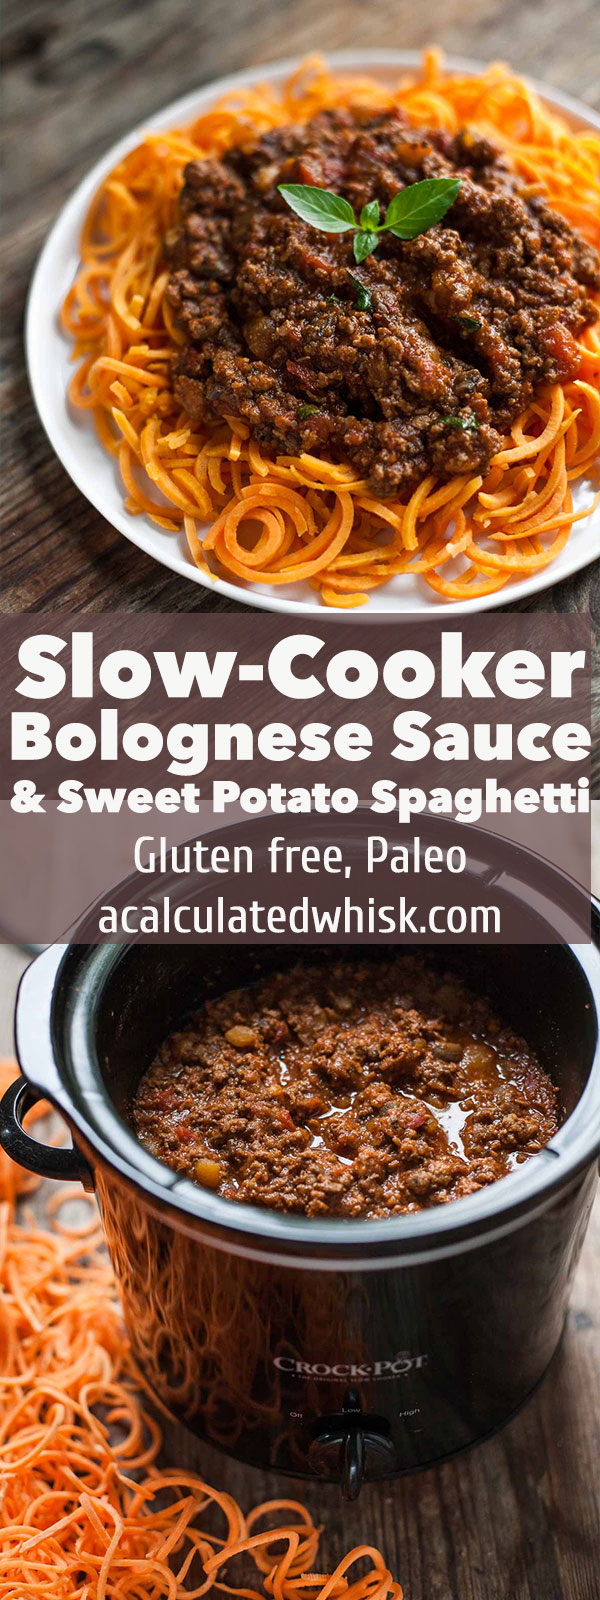 Slow-Cooked Bolognese Sauce with Sweet Potato Spaghetti | acalculatedwhisk.com 